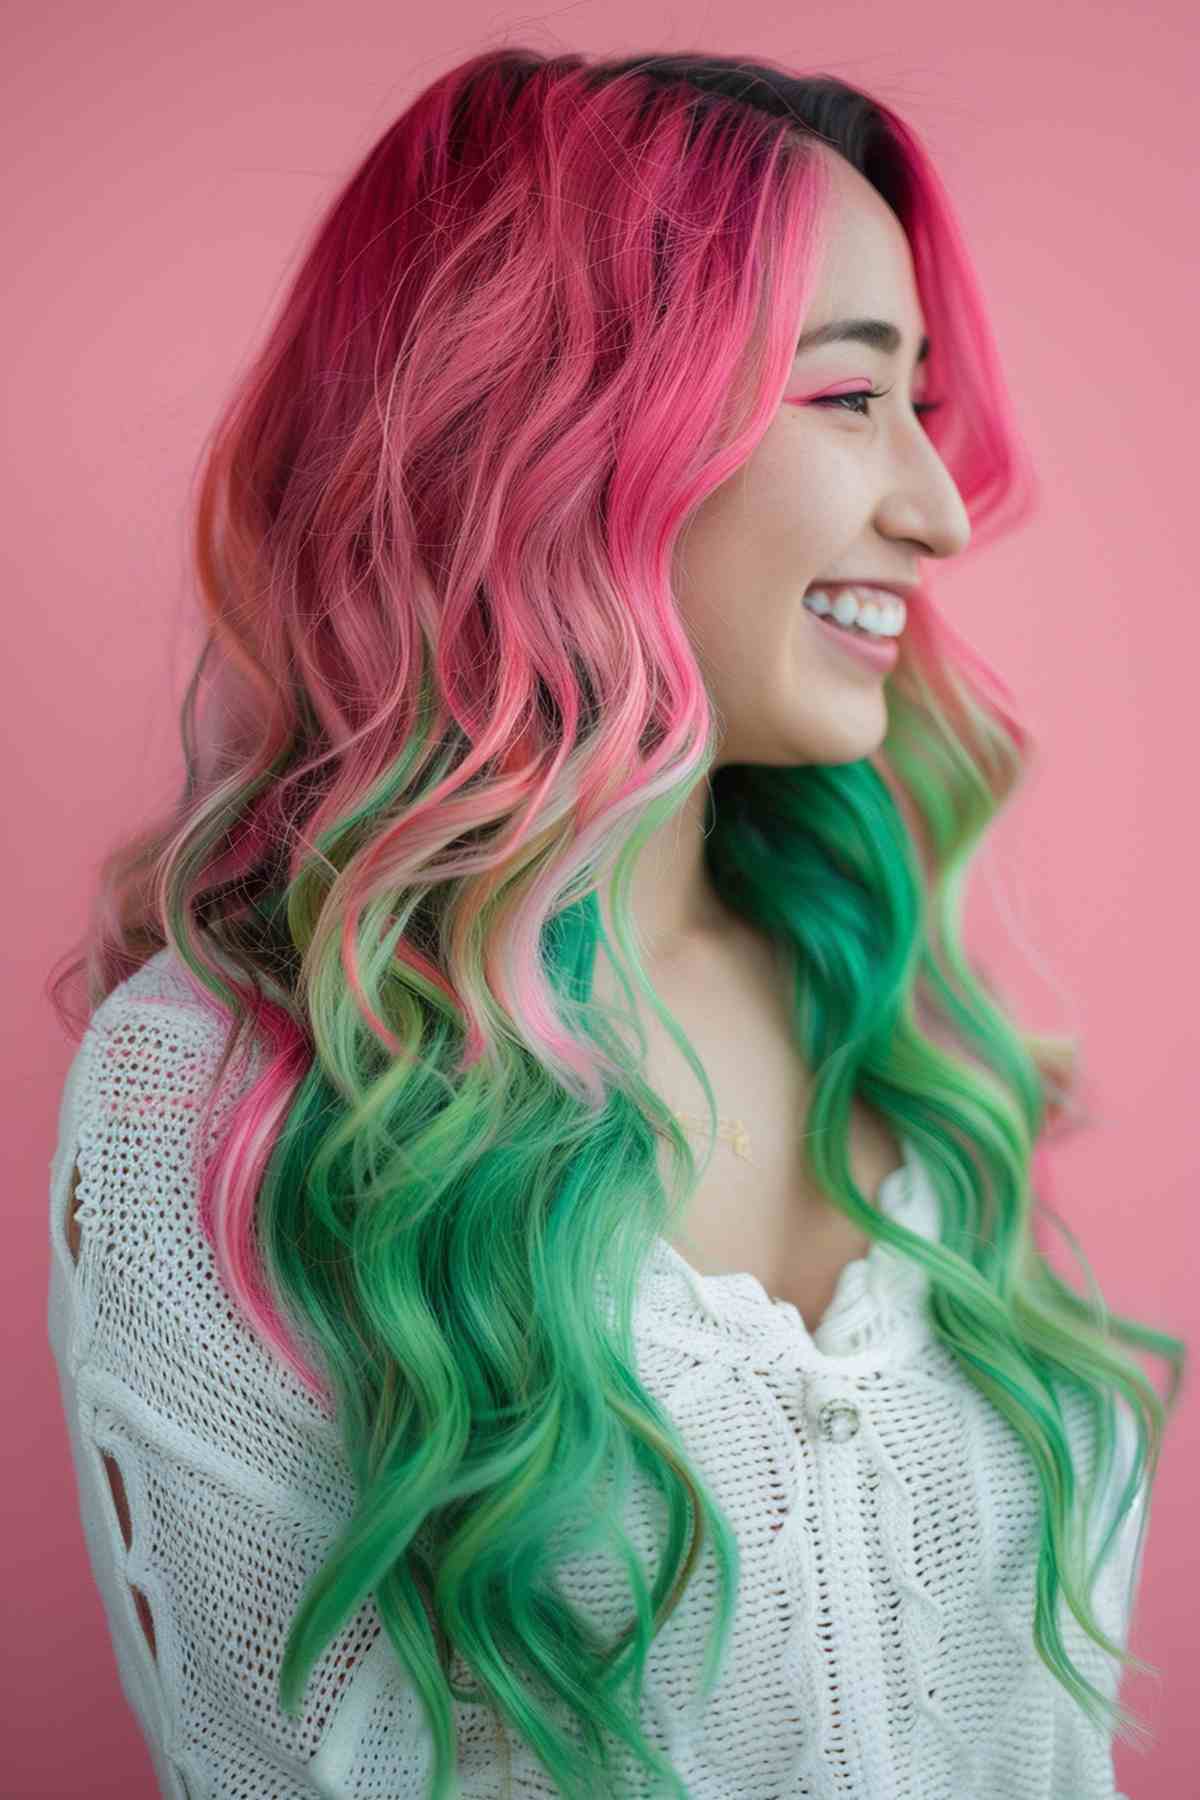 A woman with long wavy hair in a bold tri-color style, transitioning from vibrant pink at the roots to seafoam green at the tips.